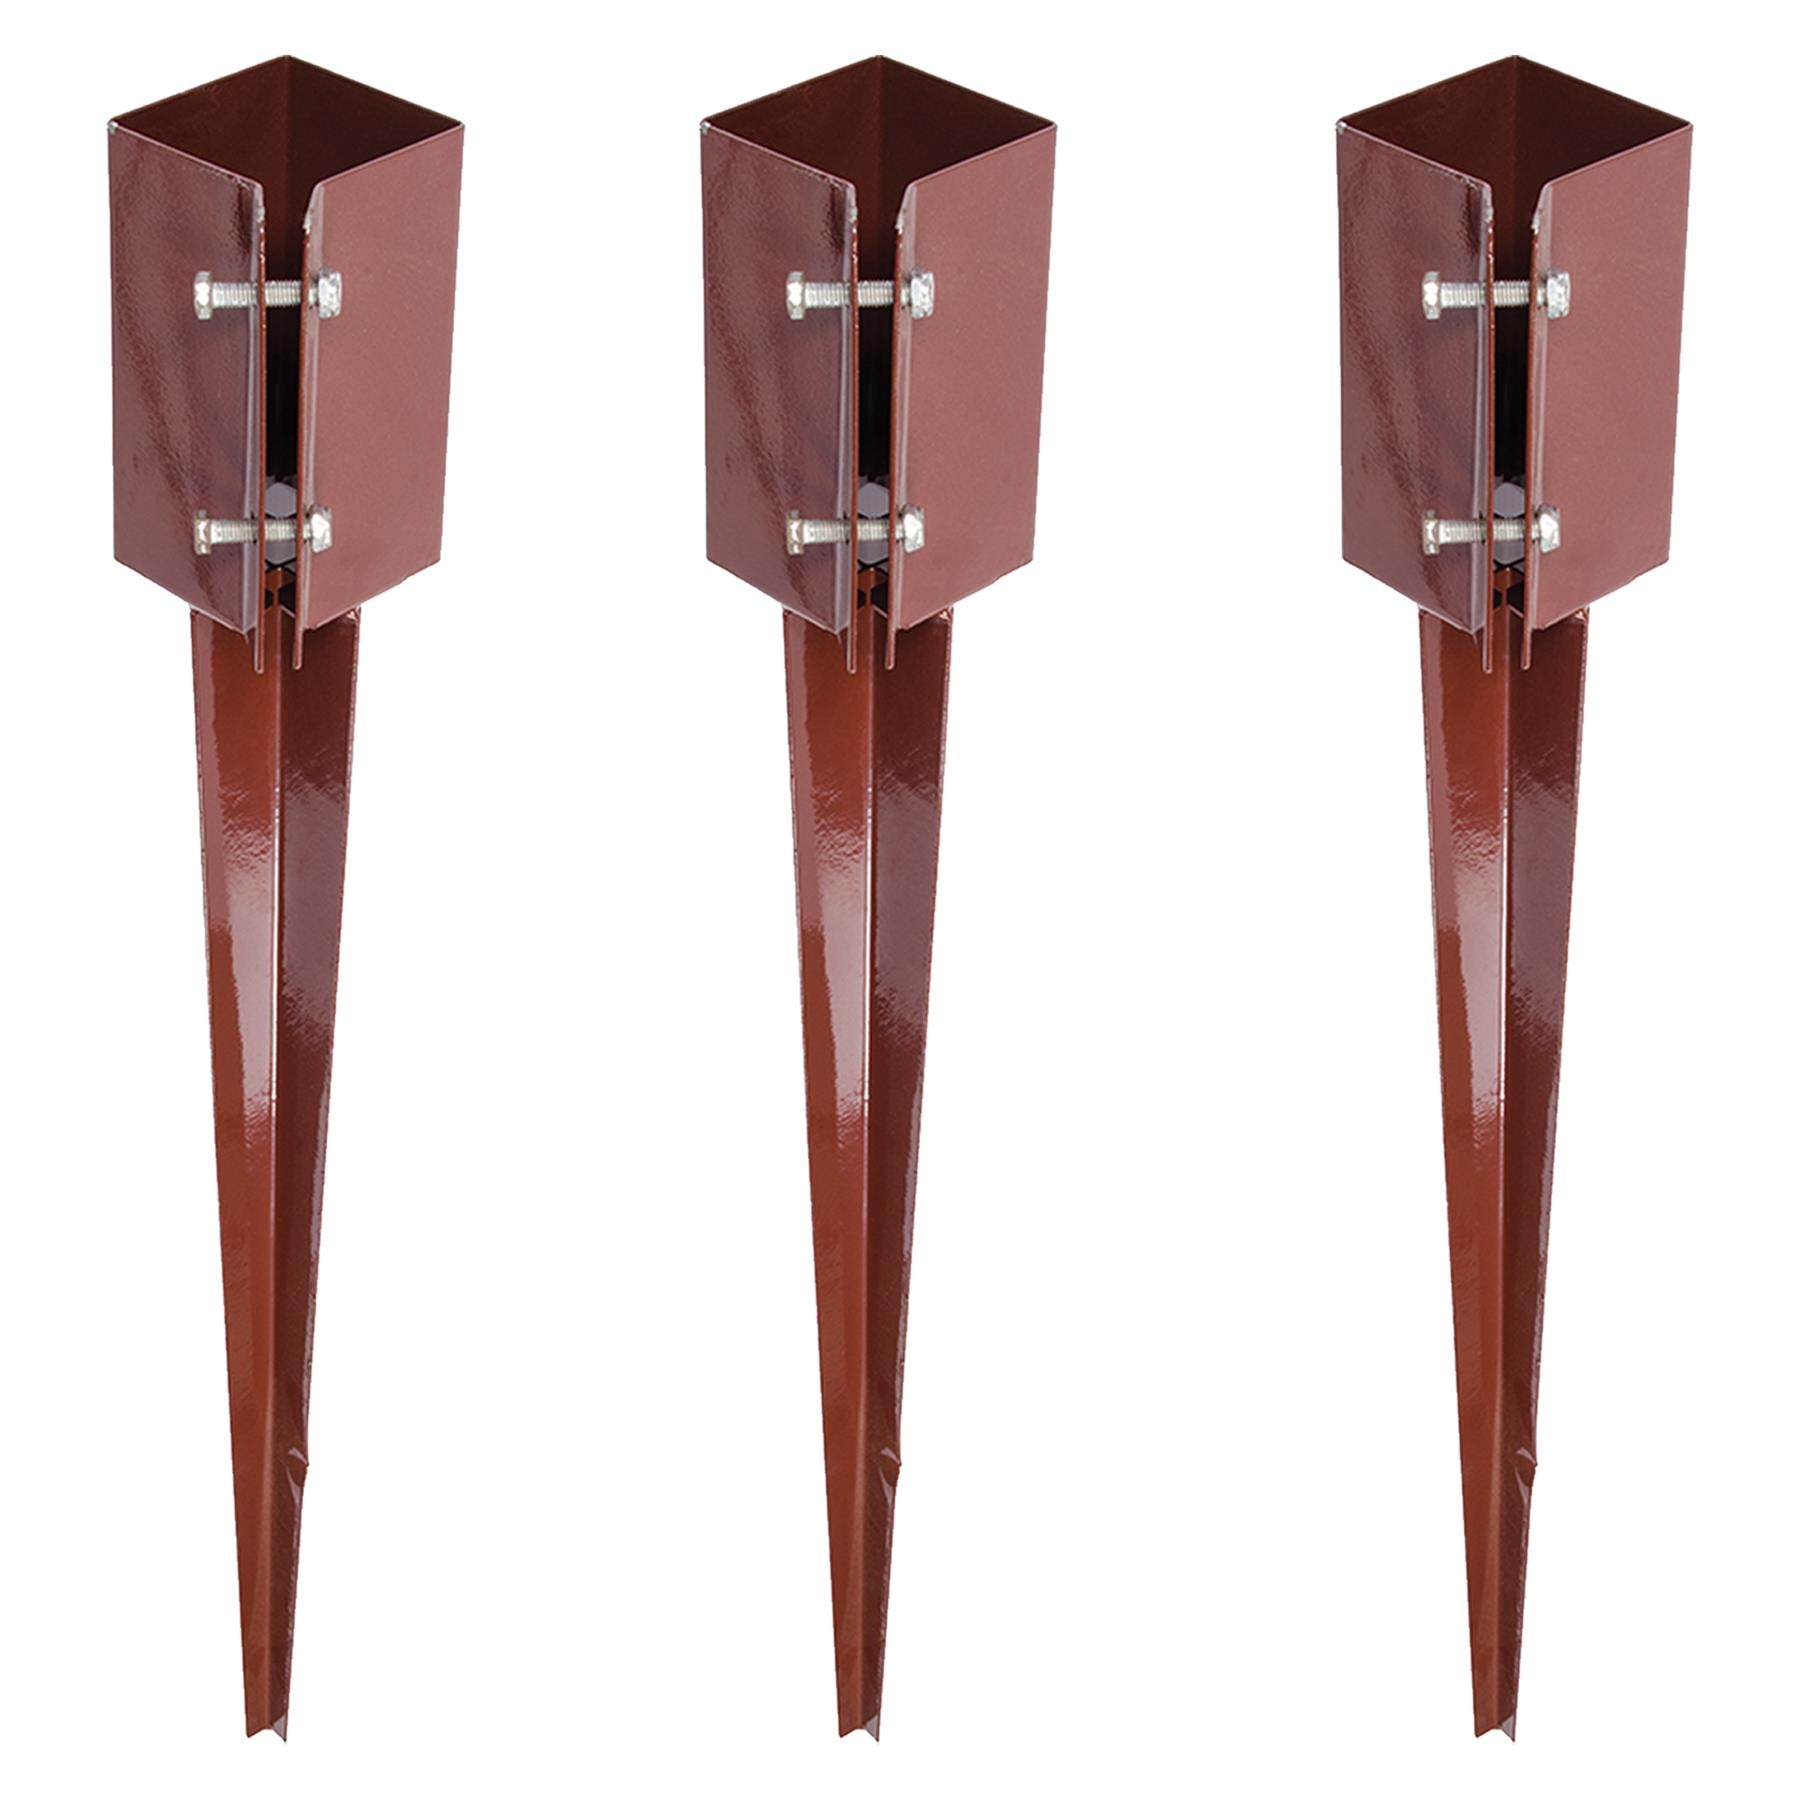 Fence Post Spike Support Holders Drive Down 750mm 3" 75 mm Like Metpost Holder 3PC